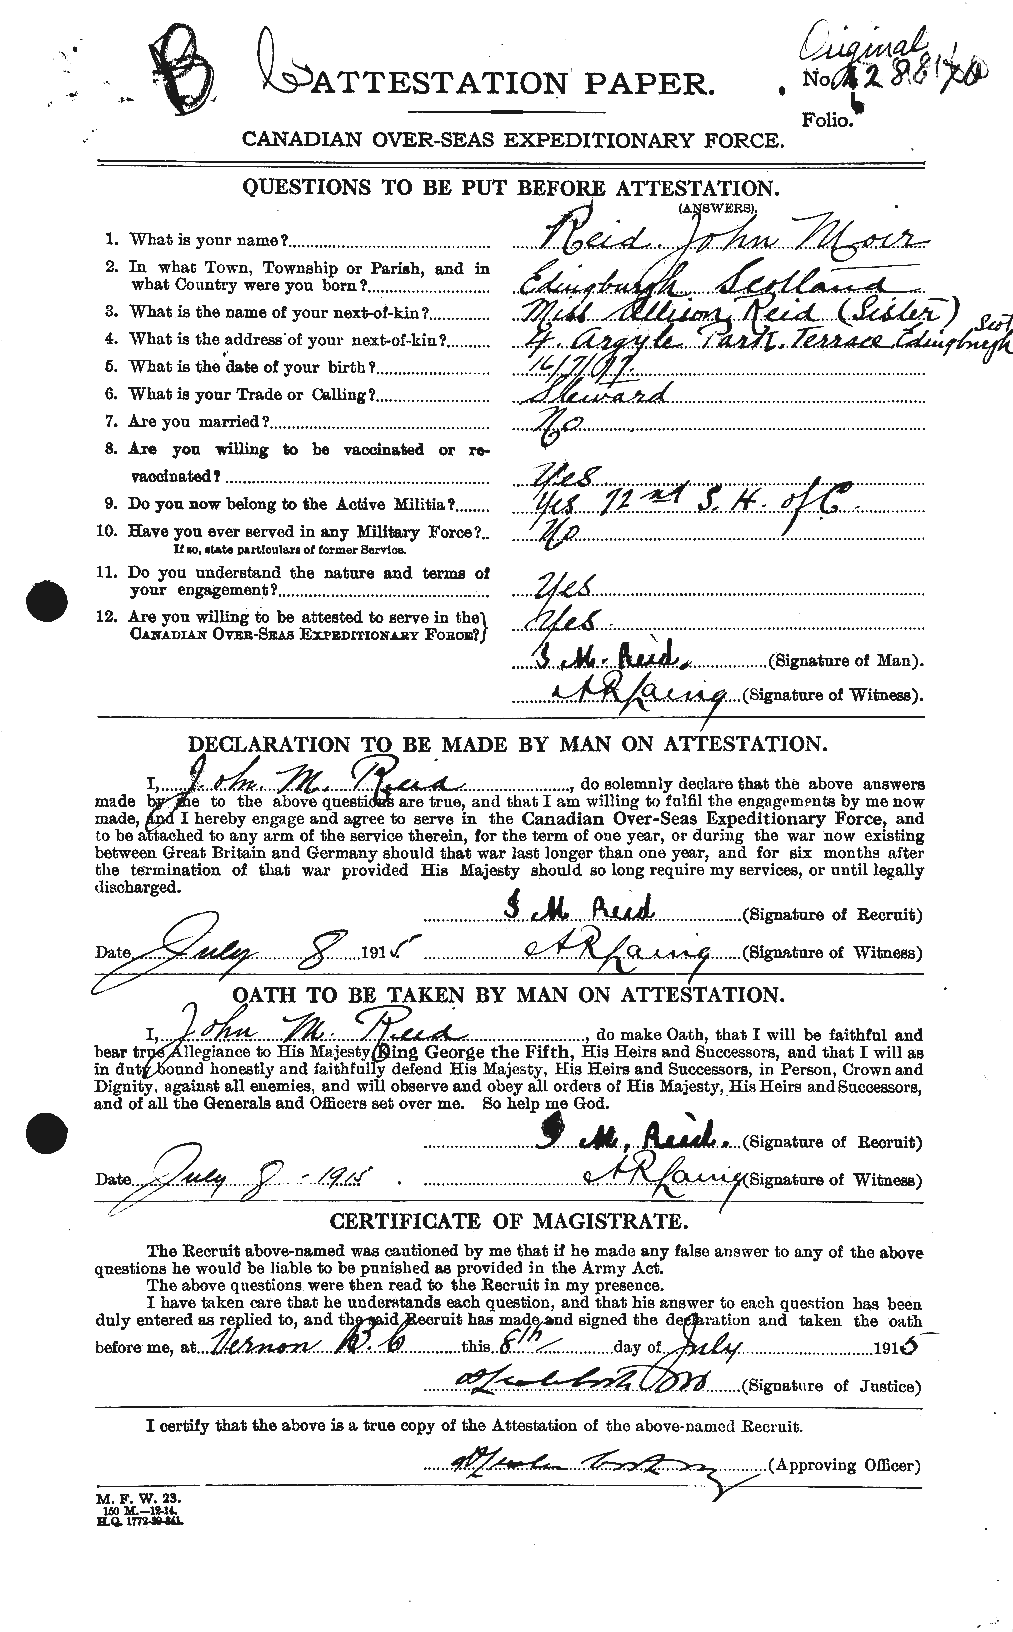 Personnel Records of the First World War - CEF 598858a